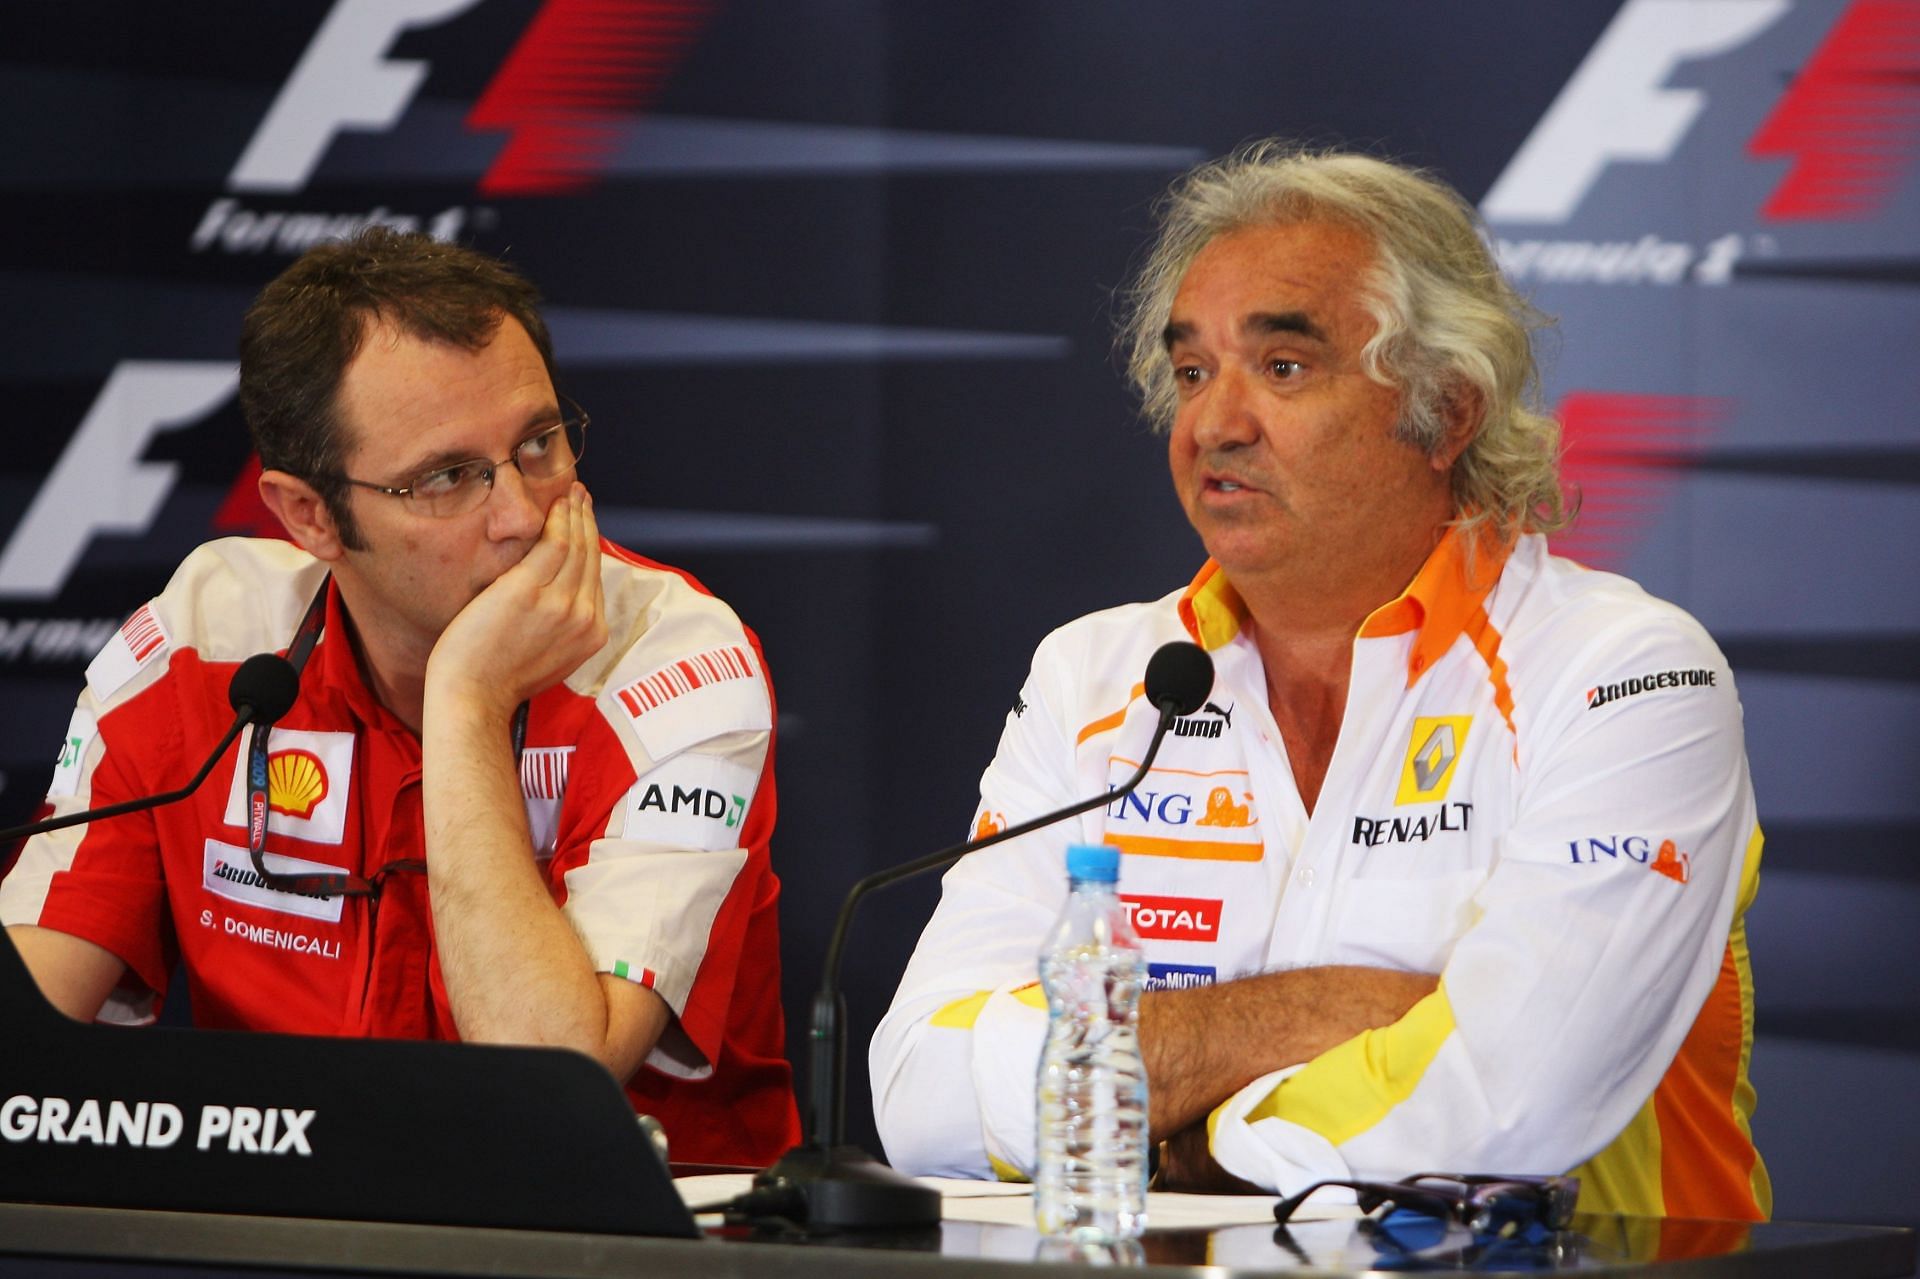 Ferrari Sporting Director Stefano Domenicali and Renault F1 Team Principal Flavio Briatore at a press conference ahead of the 2009 Turkish GP in Istanbul, Turkey. (Photo by Mark Thompson/Getty Images)